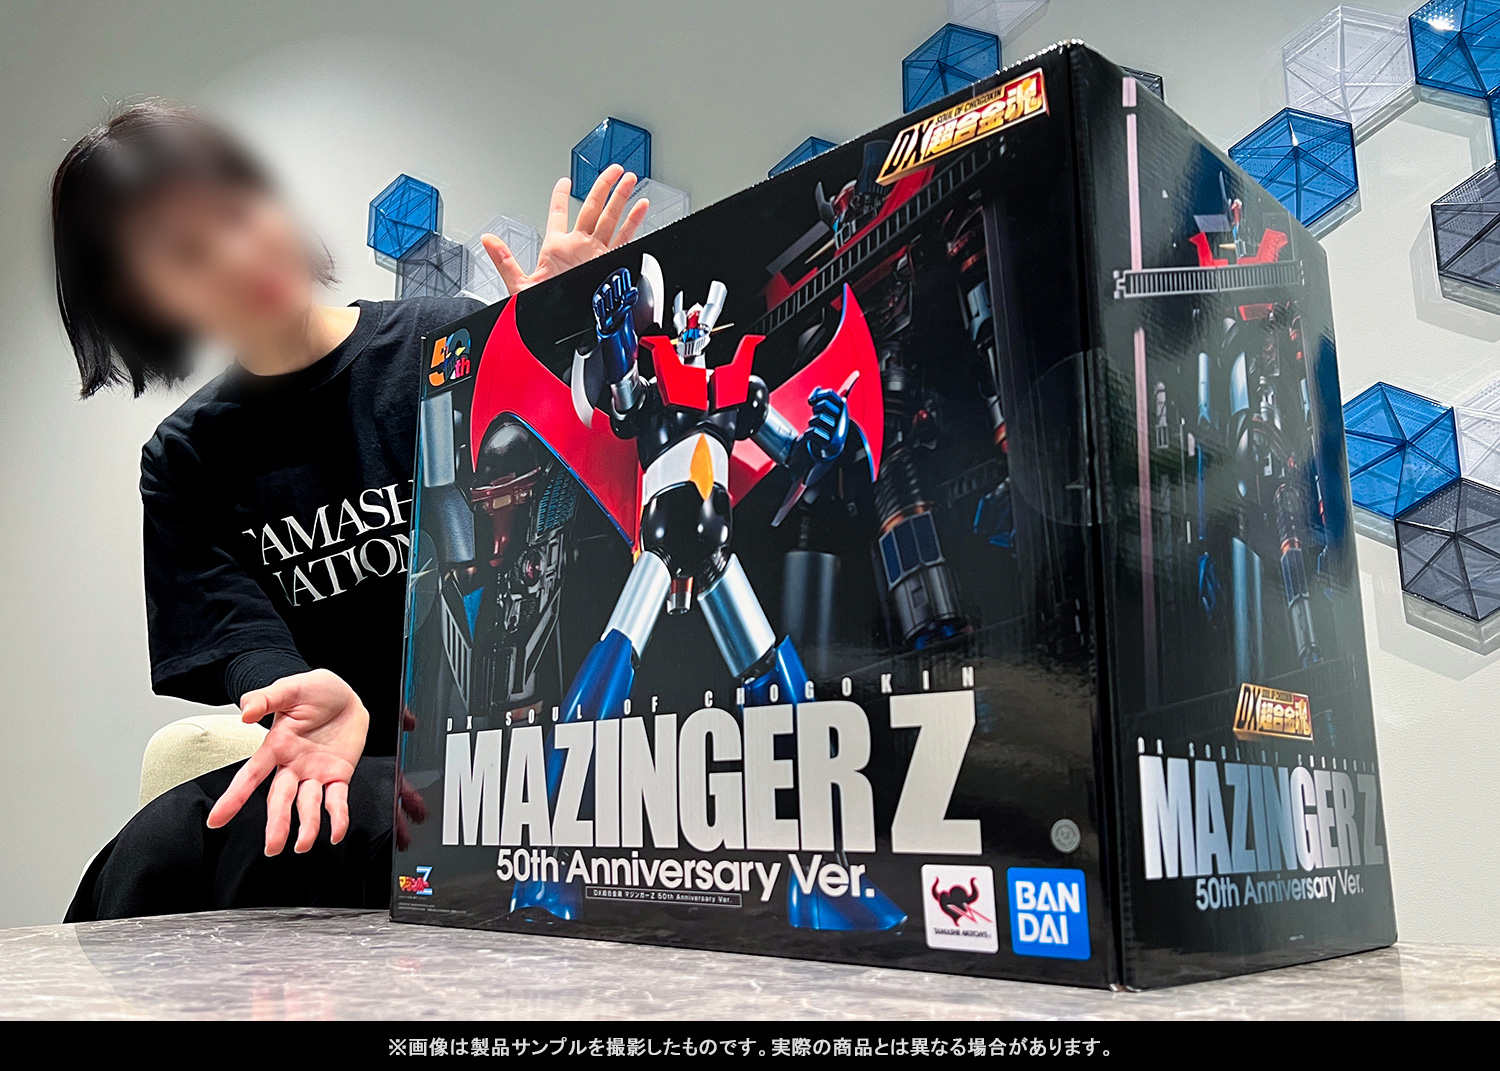 The ultimate Kurogane House is revived—Product sample introduction of DX SOUL OF CHOGOKIN MAZINGER Z 50th Anniversary Ver., released in stores on December 29.